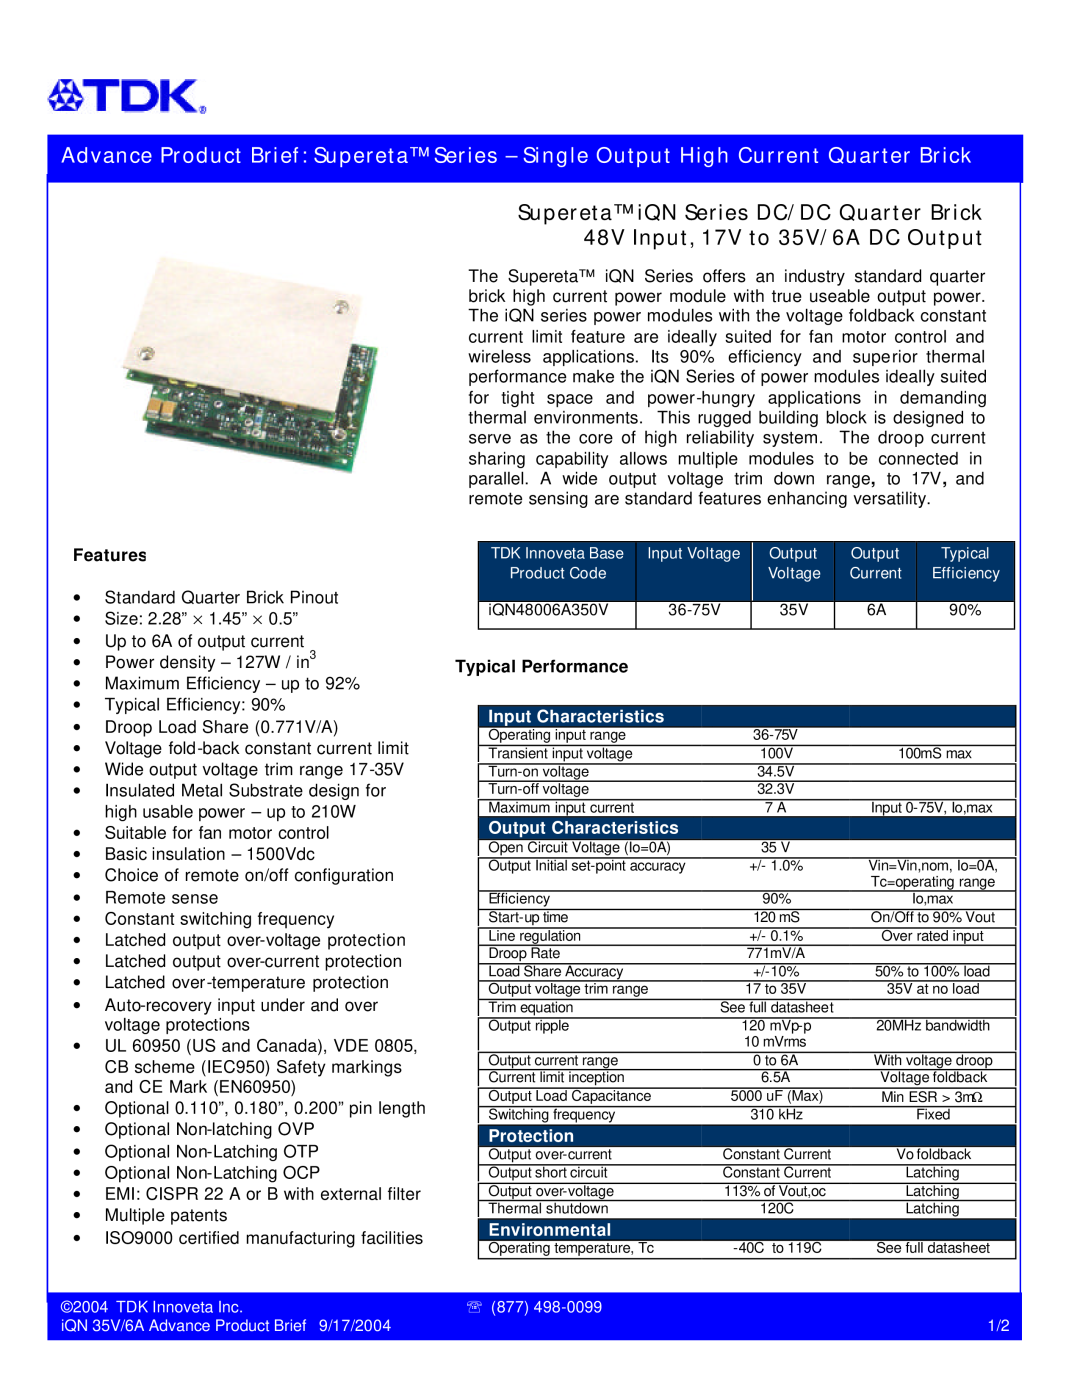 TDK iQN 35V/6A manual Features, Typical Performance 